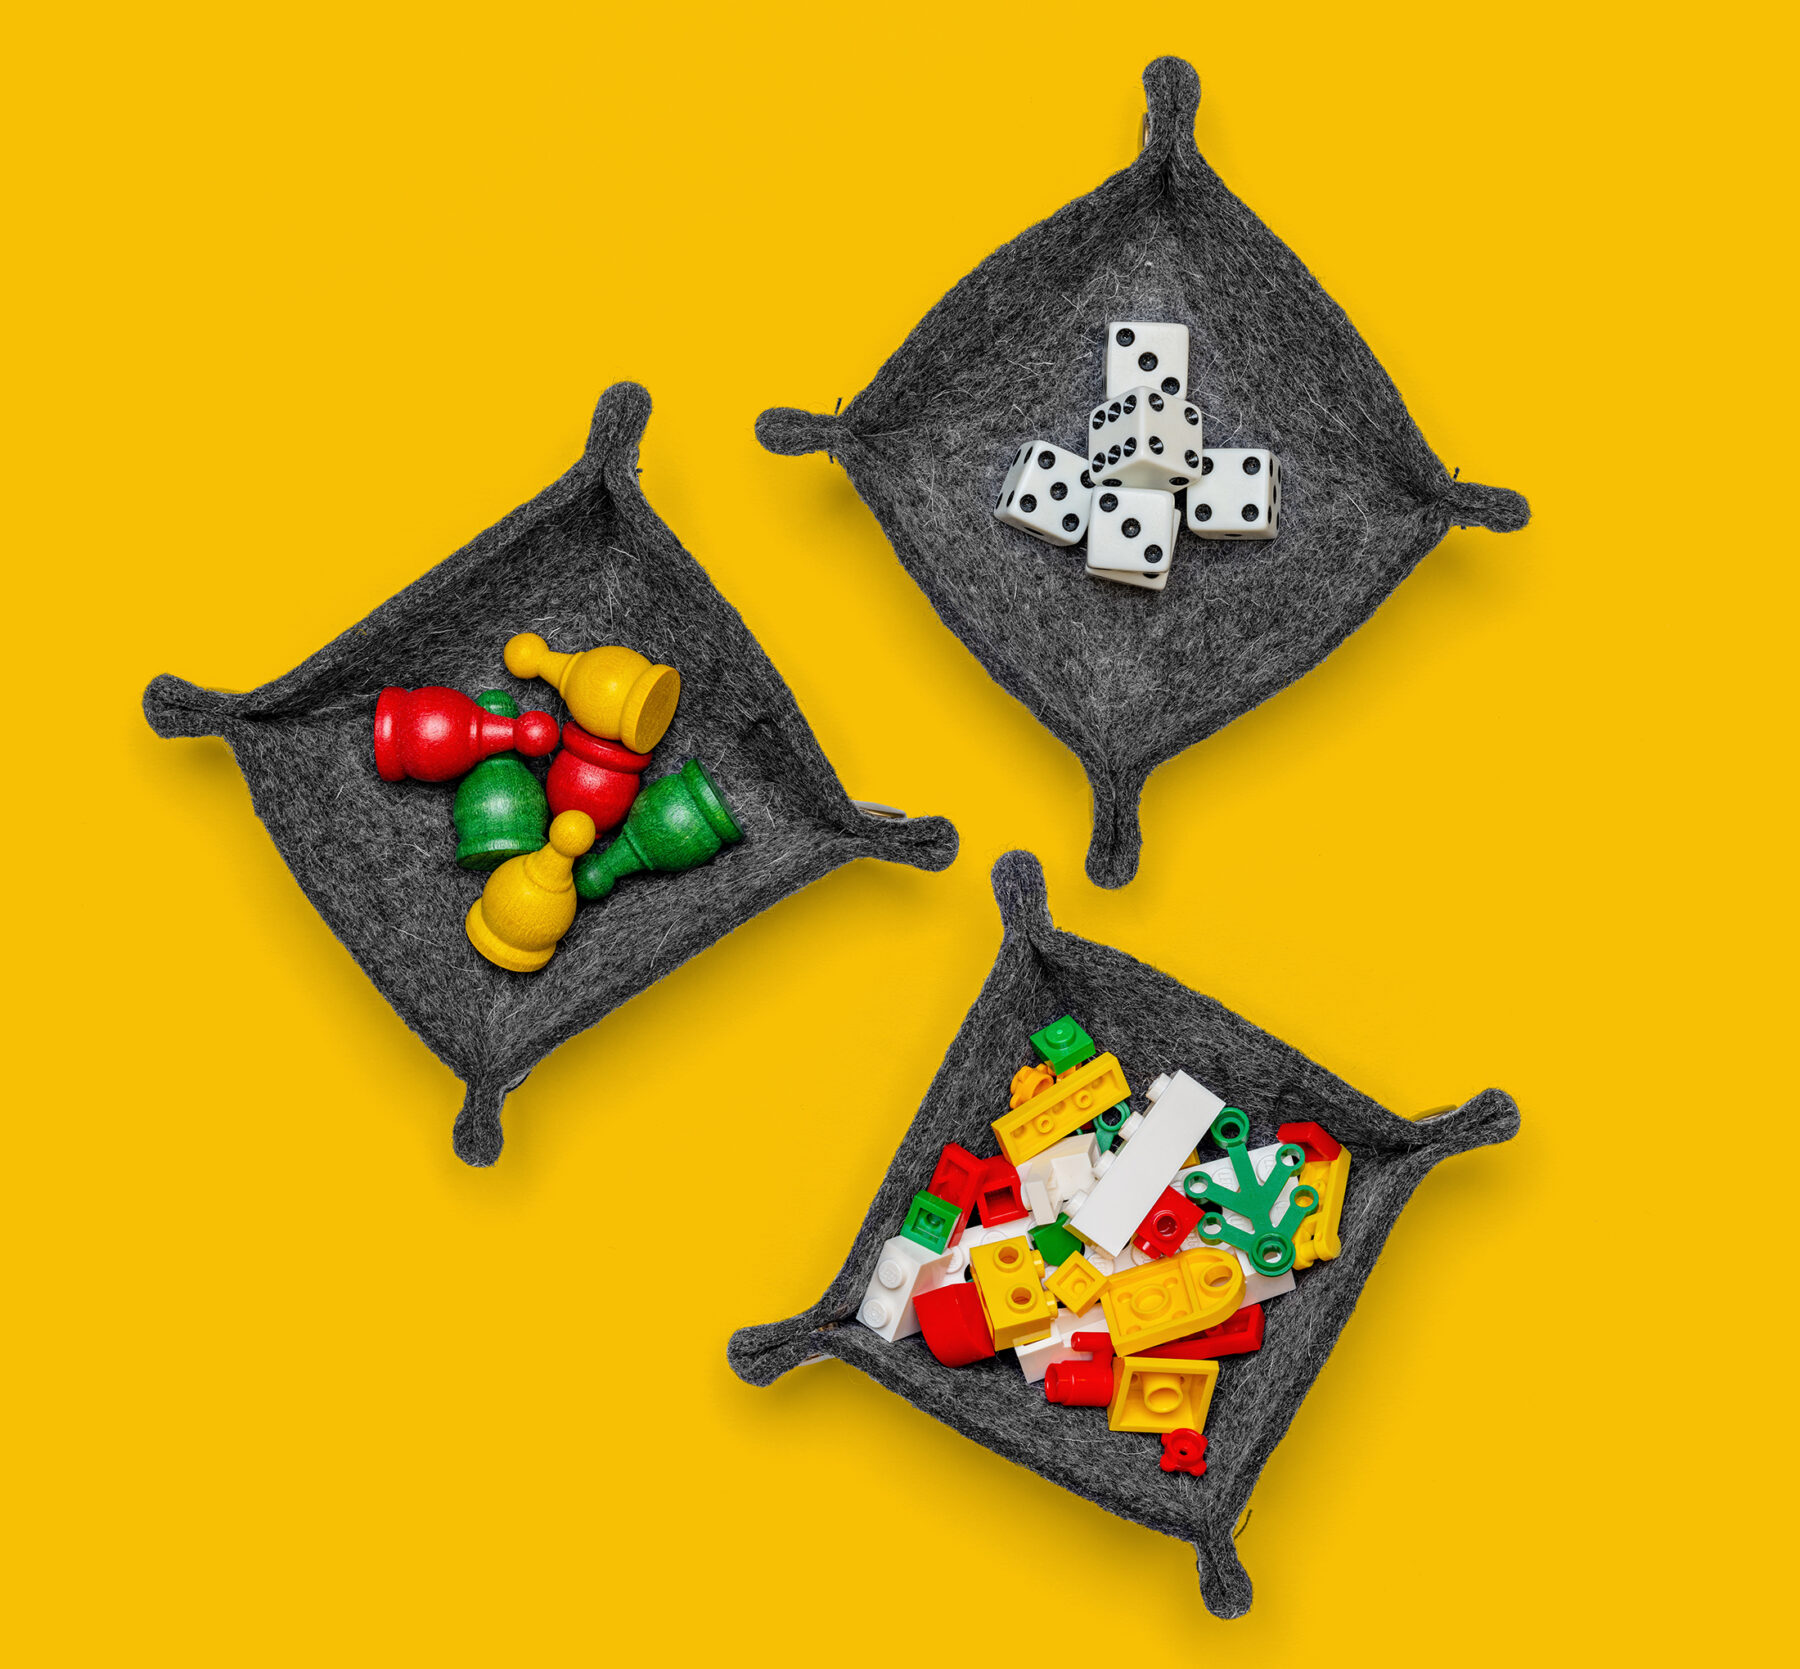 A birdseye view of three assembed trays each one holding: dice, colorful pawns, and Lego pieces.